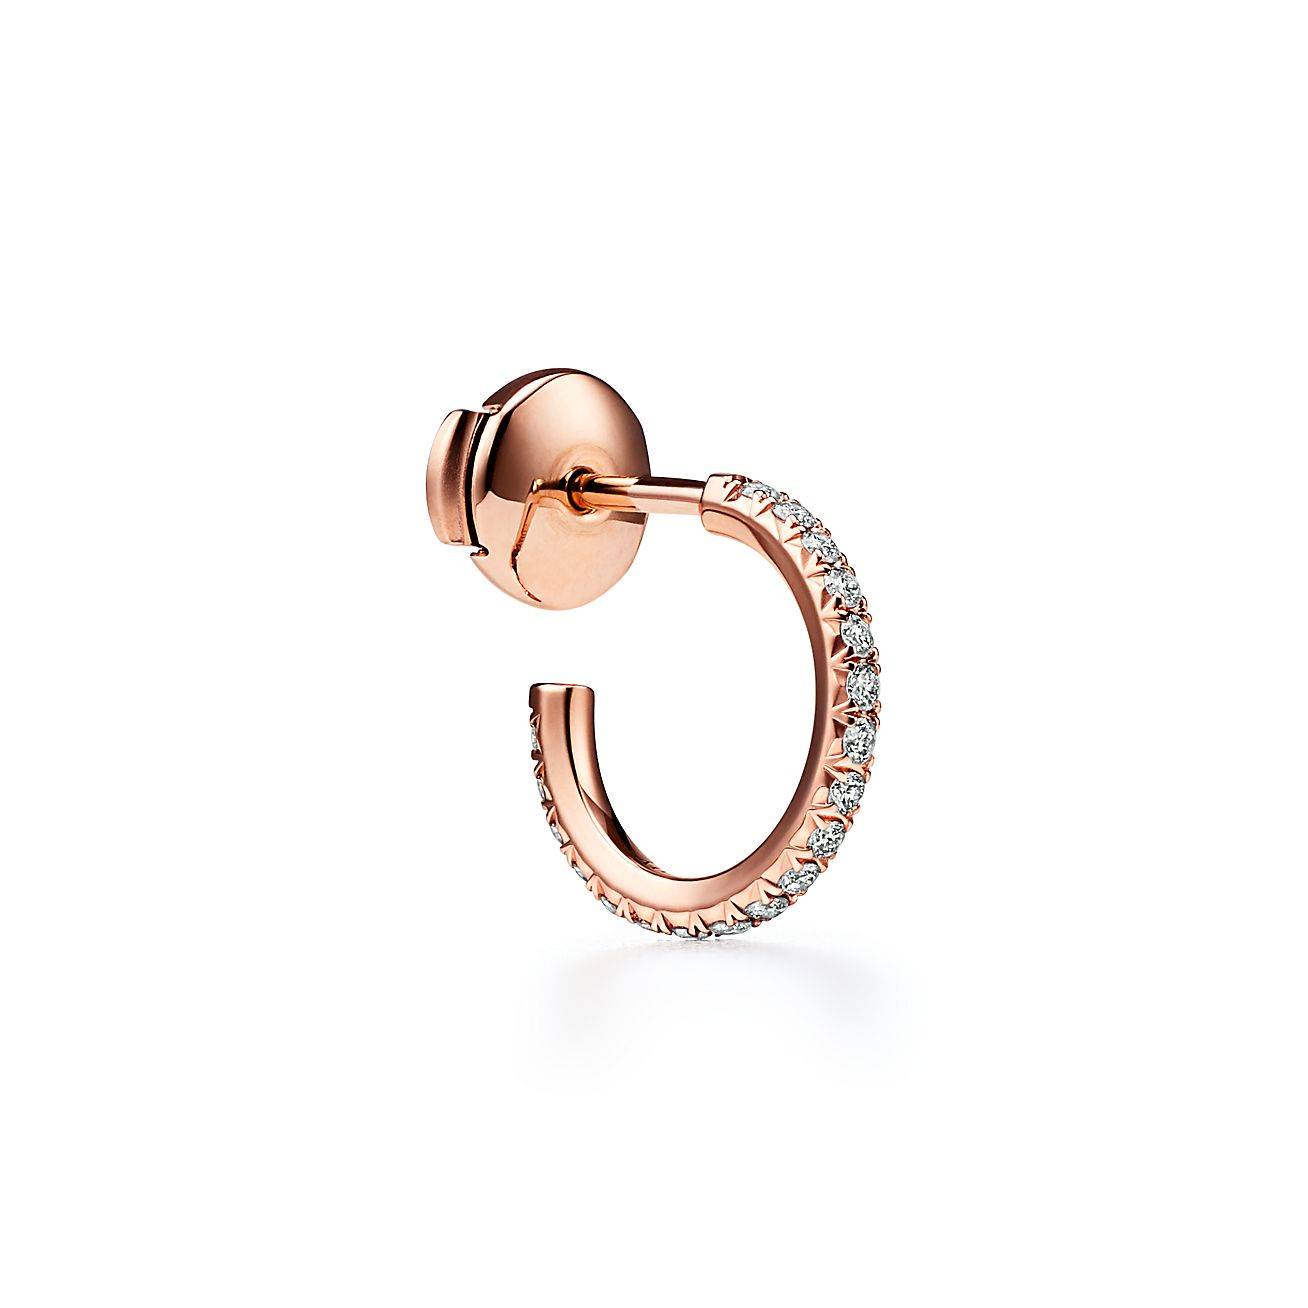 TIFFANY METRO HOOP EARRINGS IN ROSE GOLD WITH DIAMONDS, SMALL